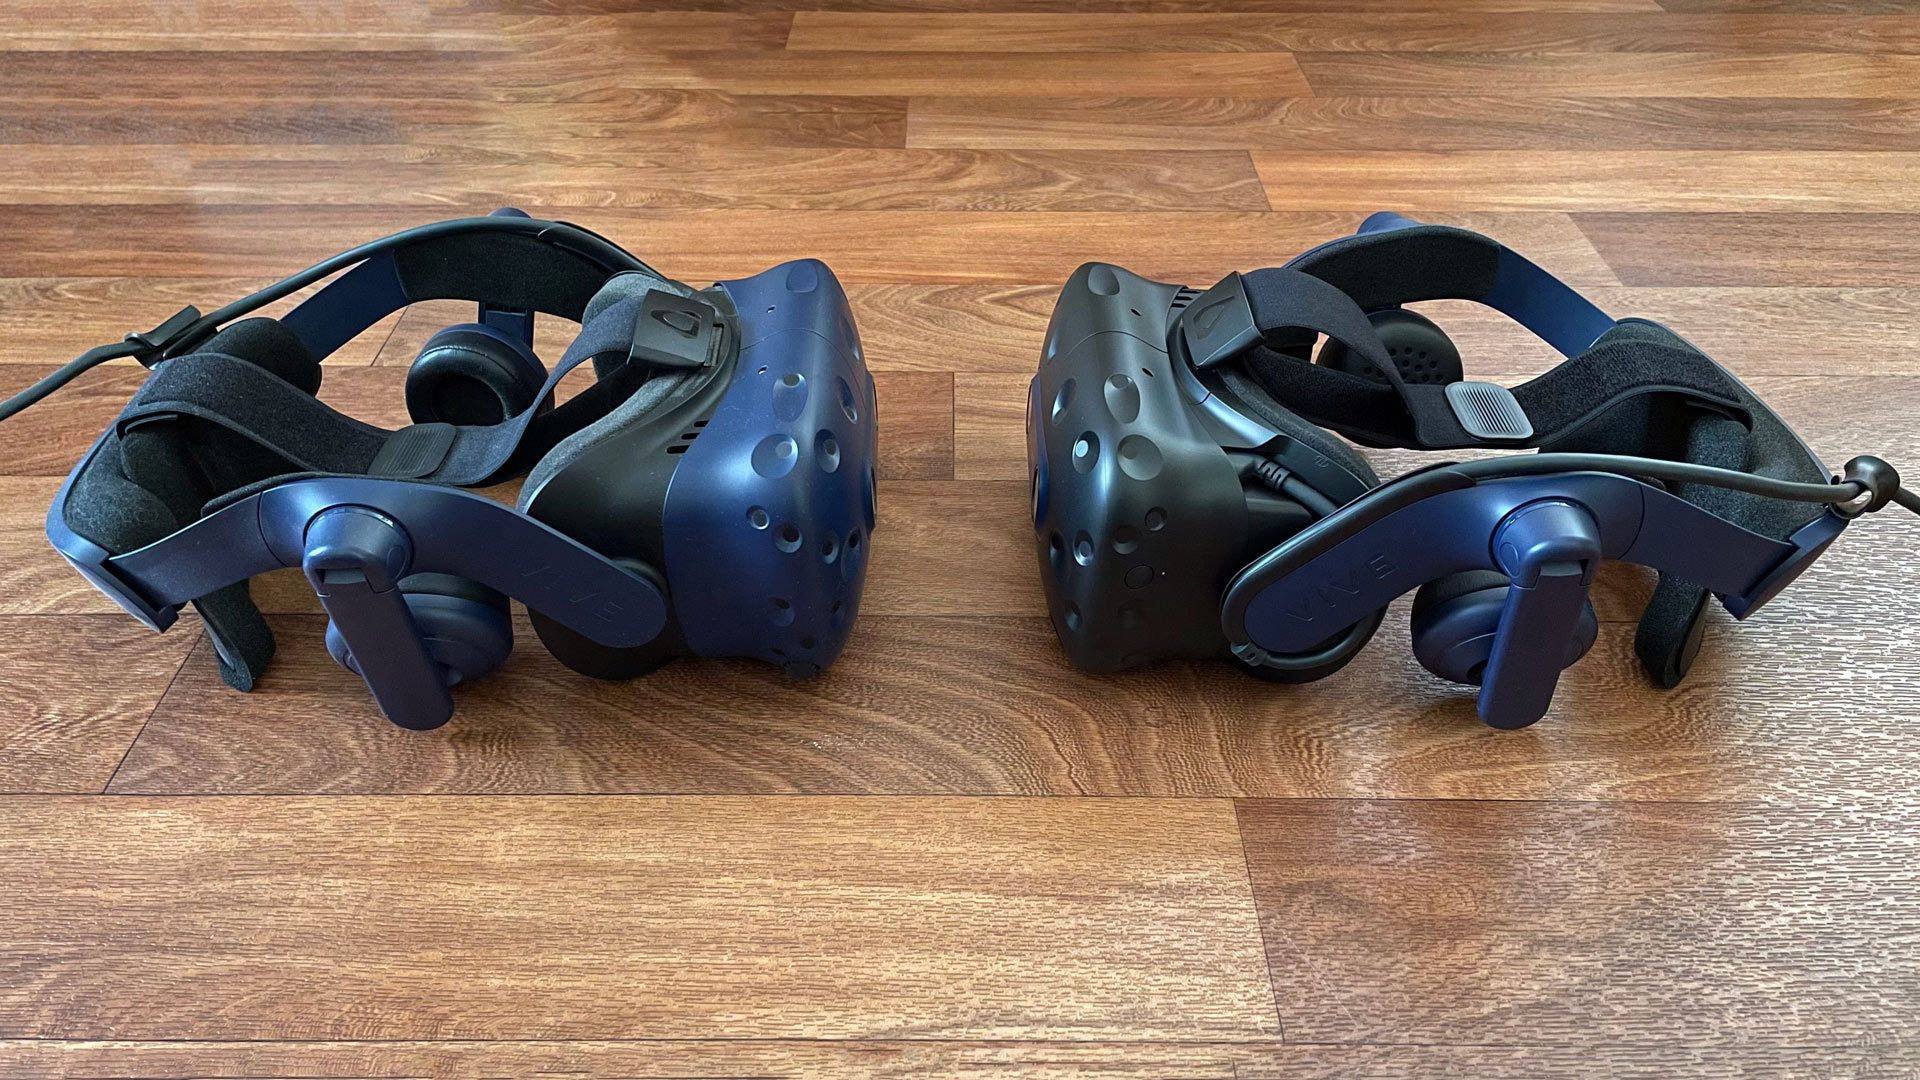 HTC Vive Pro 2 – "Pro" Price with Not Quite Pro Performance